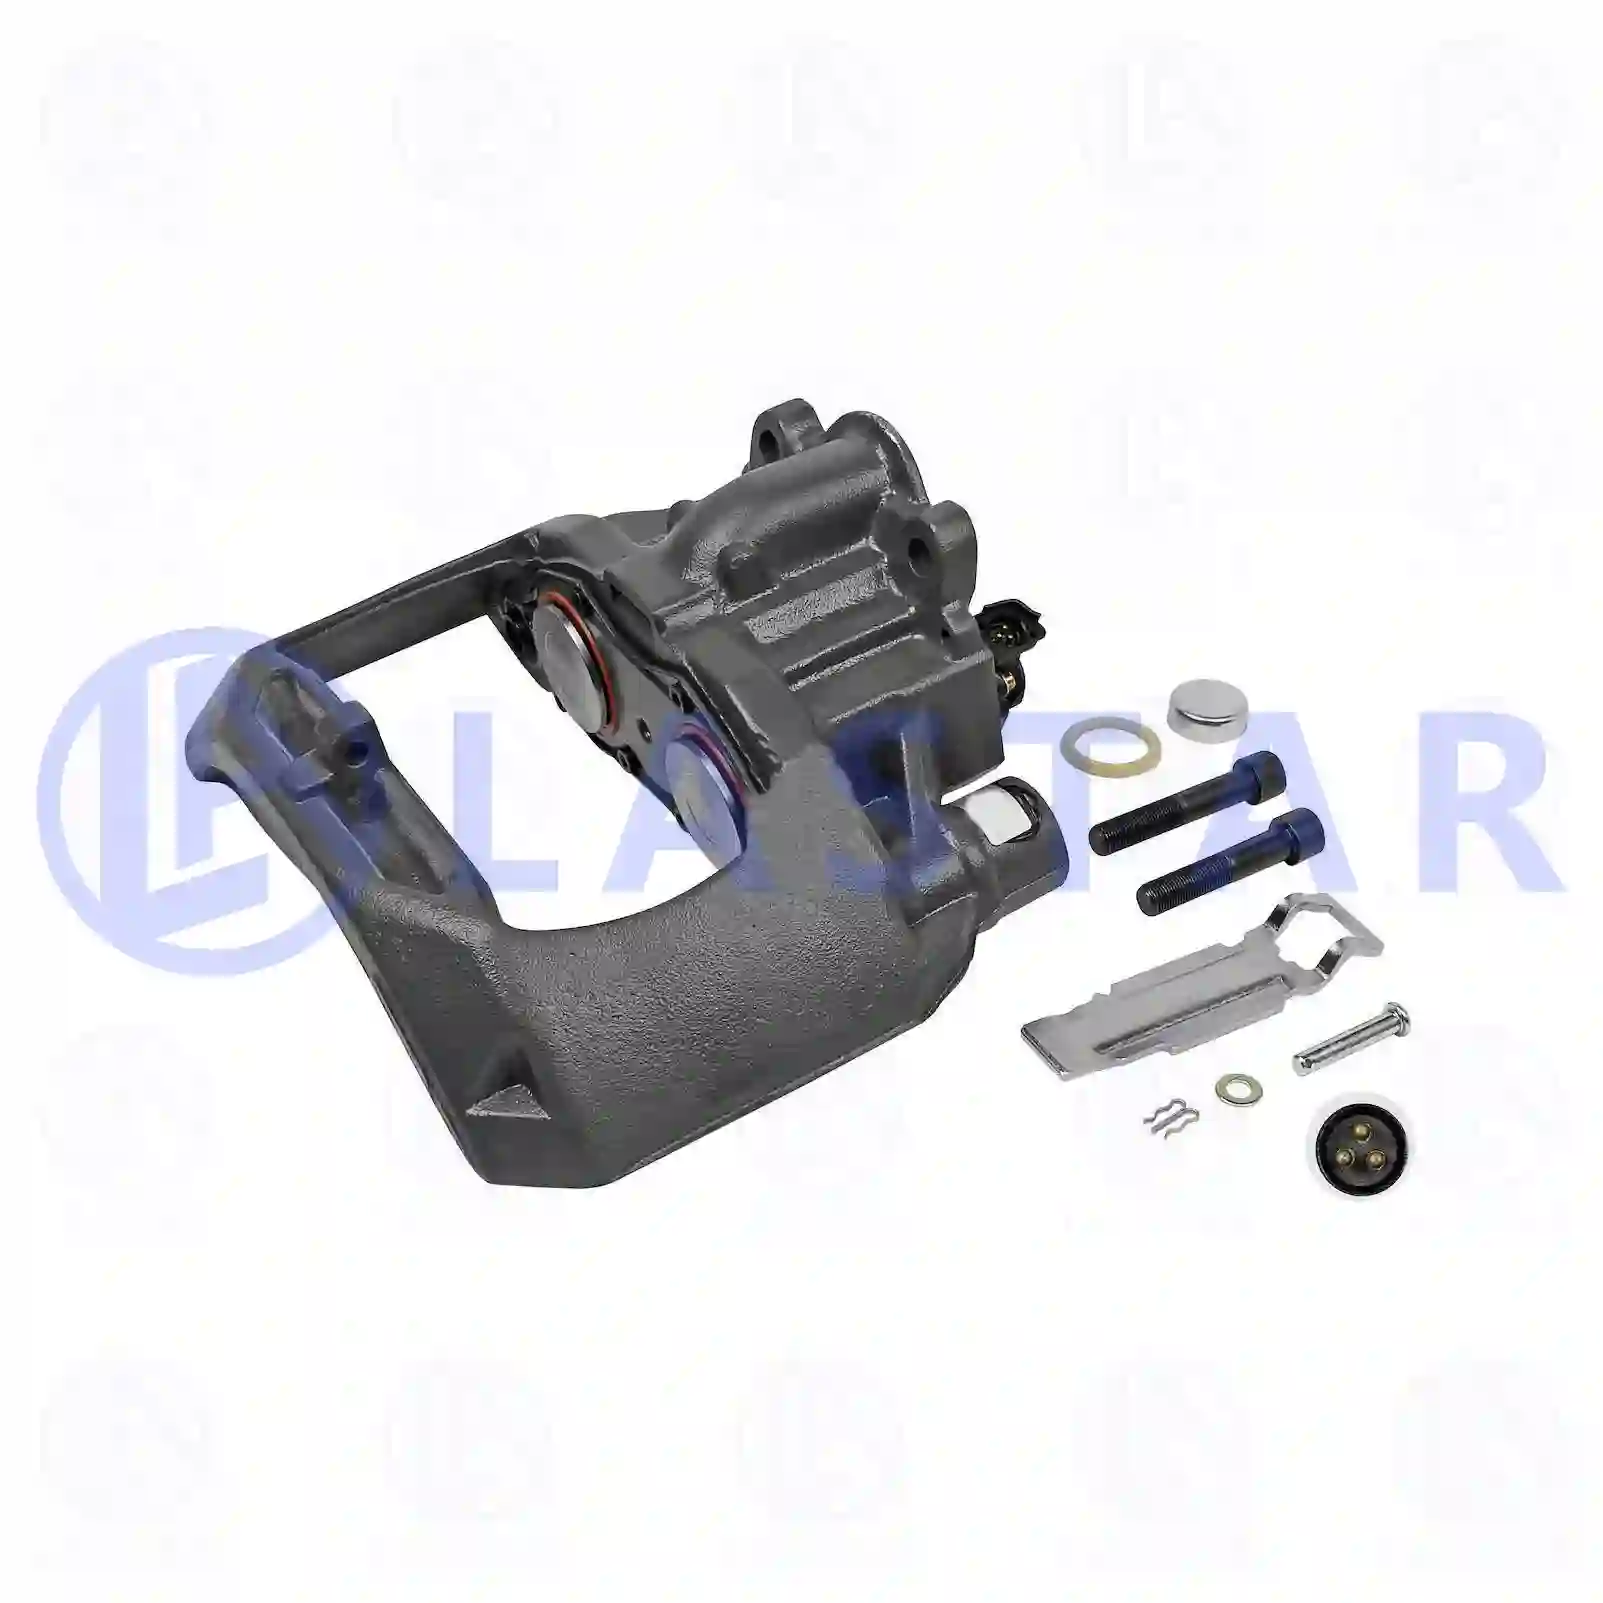 Brake caliper, right, reman. / without old core, 77715033, 0014202601, 0014205301, 0014207001, 0024201583, 0024208283, 0044209483, 6284200801, 6294300190, 6294300390, 9424201701, 9424202201, 9424203401, 9424205001, 9494200701, 9494201101 ||  77715033 Lastar Spare Part | Truck Spare Parts, Auotomotive Spare Parts Brake caliper, right, reman. / without old core, 77715033, 0014202601, 0014205301, 0014207001, 0024201583, 0024208283, 0044209483, 6284200801, 6294300190, 6294300390, 9424201701, 9424202201, 9424203401, 9424205001, 9494200701, 9494201101 ||  77715033 Lastar Spare Part | Truck Spare Parts, Auotomotive Spare Parts